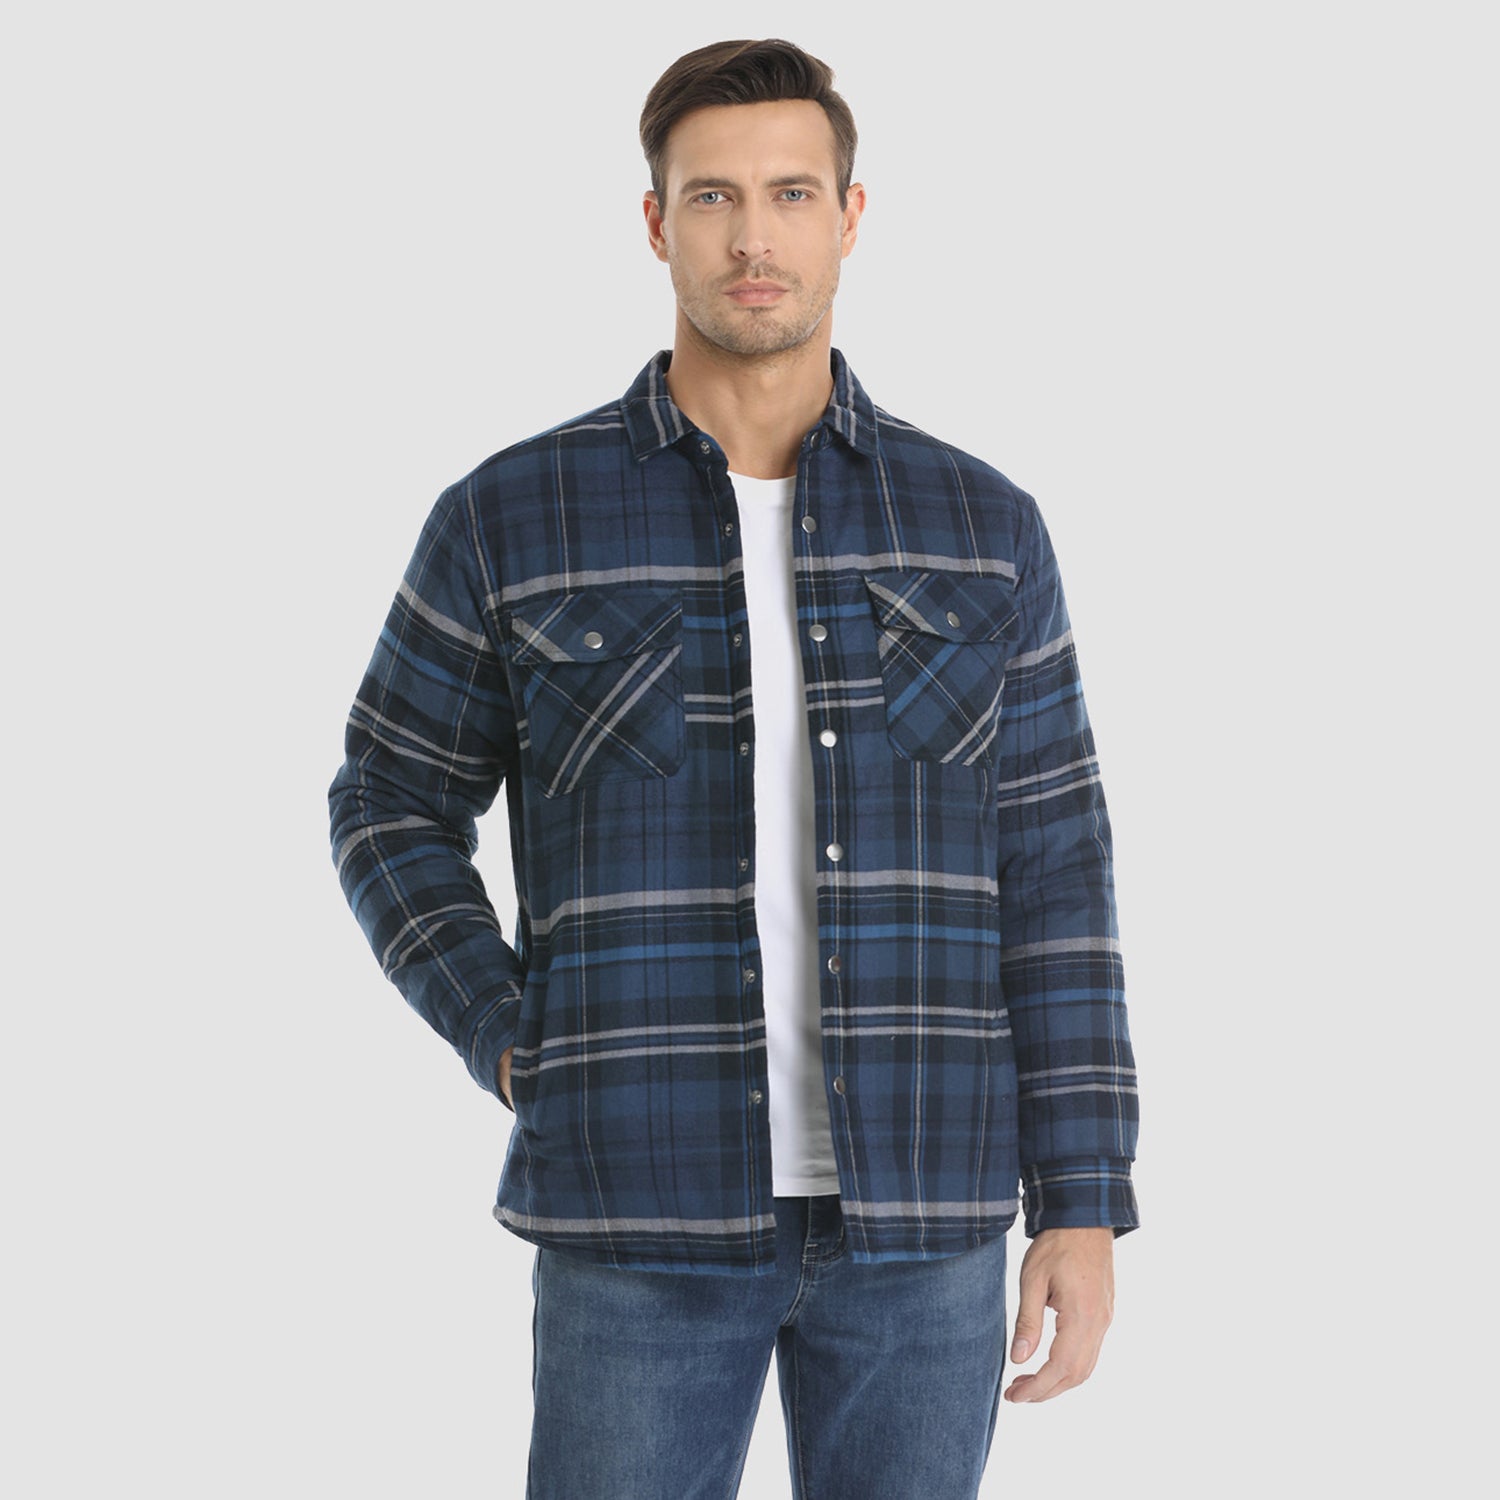 Wrangler Men's Quilt Lined Flannel Shirt Jacket – Branded Country Wear